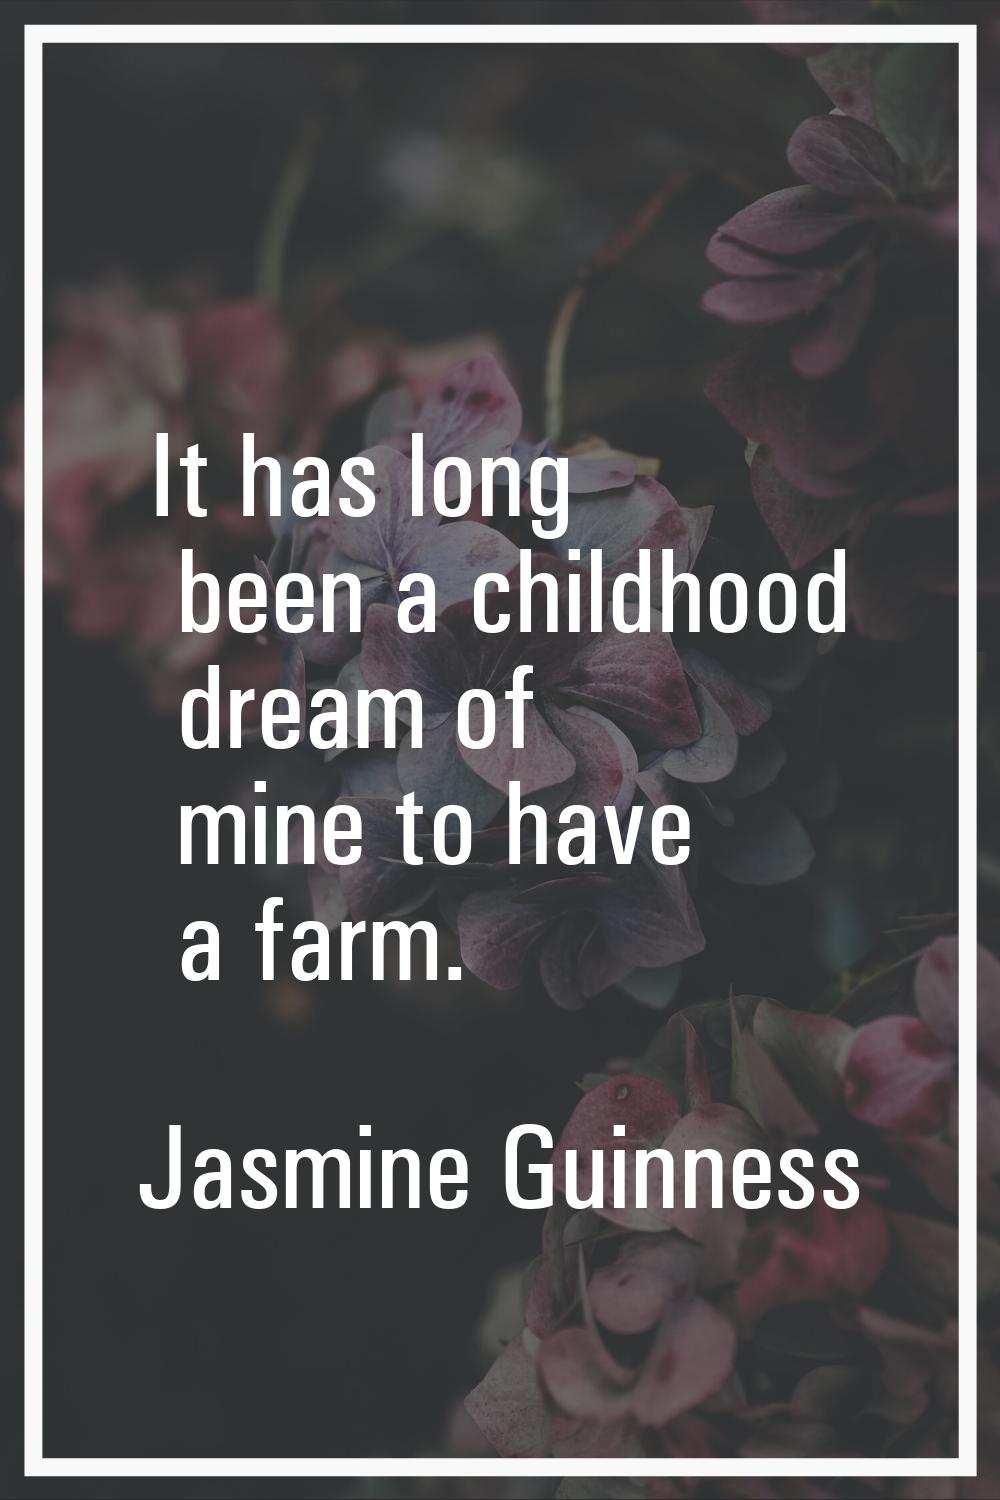 It has long been a childhood dream of mine to have a farm.